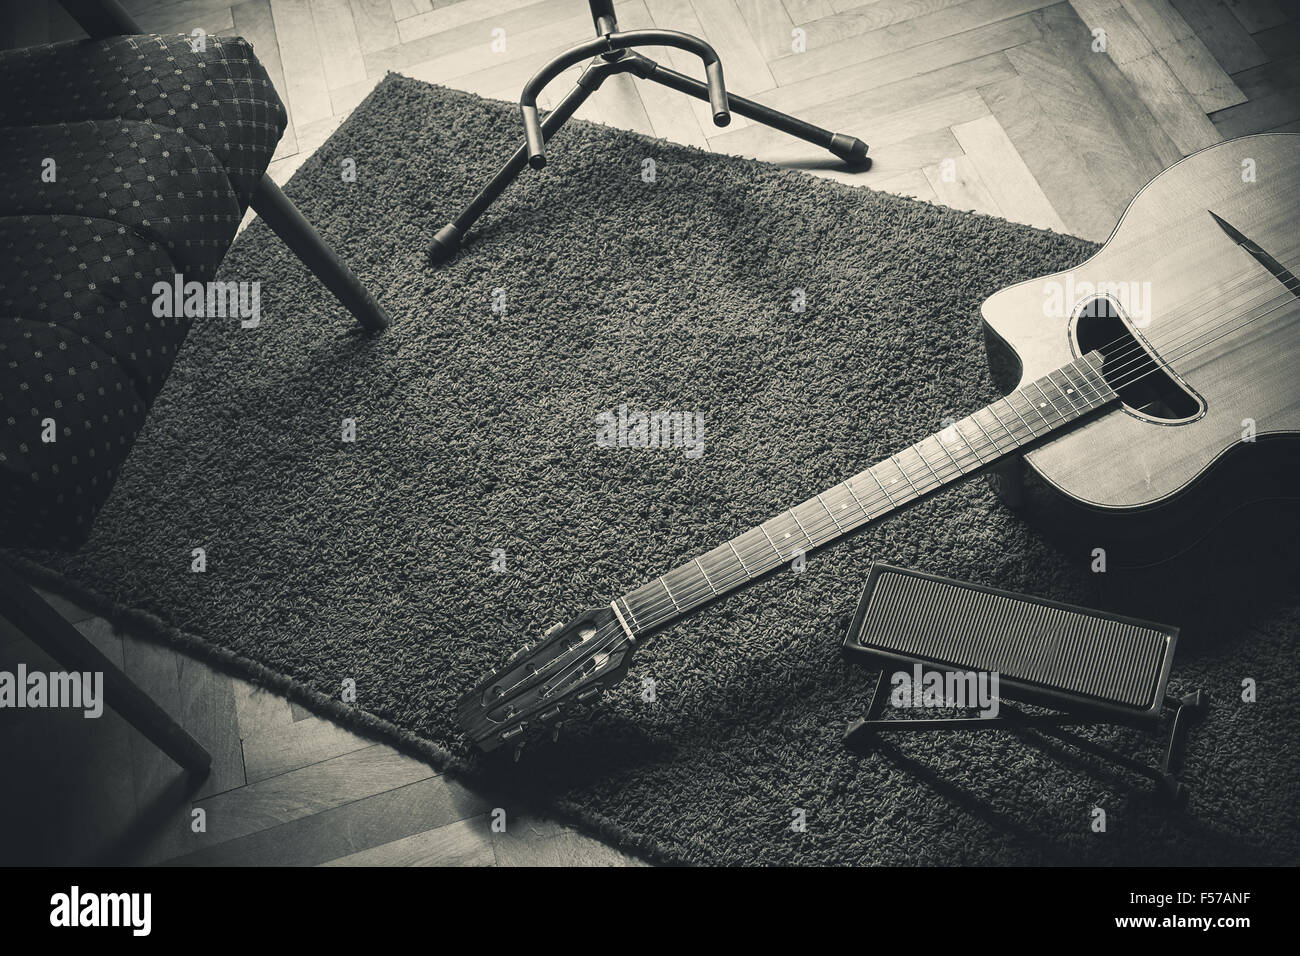 Old acoustic gypsy guitar on carpet in one corner and part of an armchair and guitar stand on the other side. Stock Photo